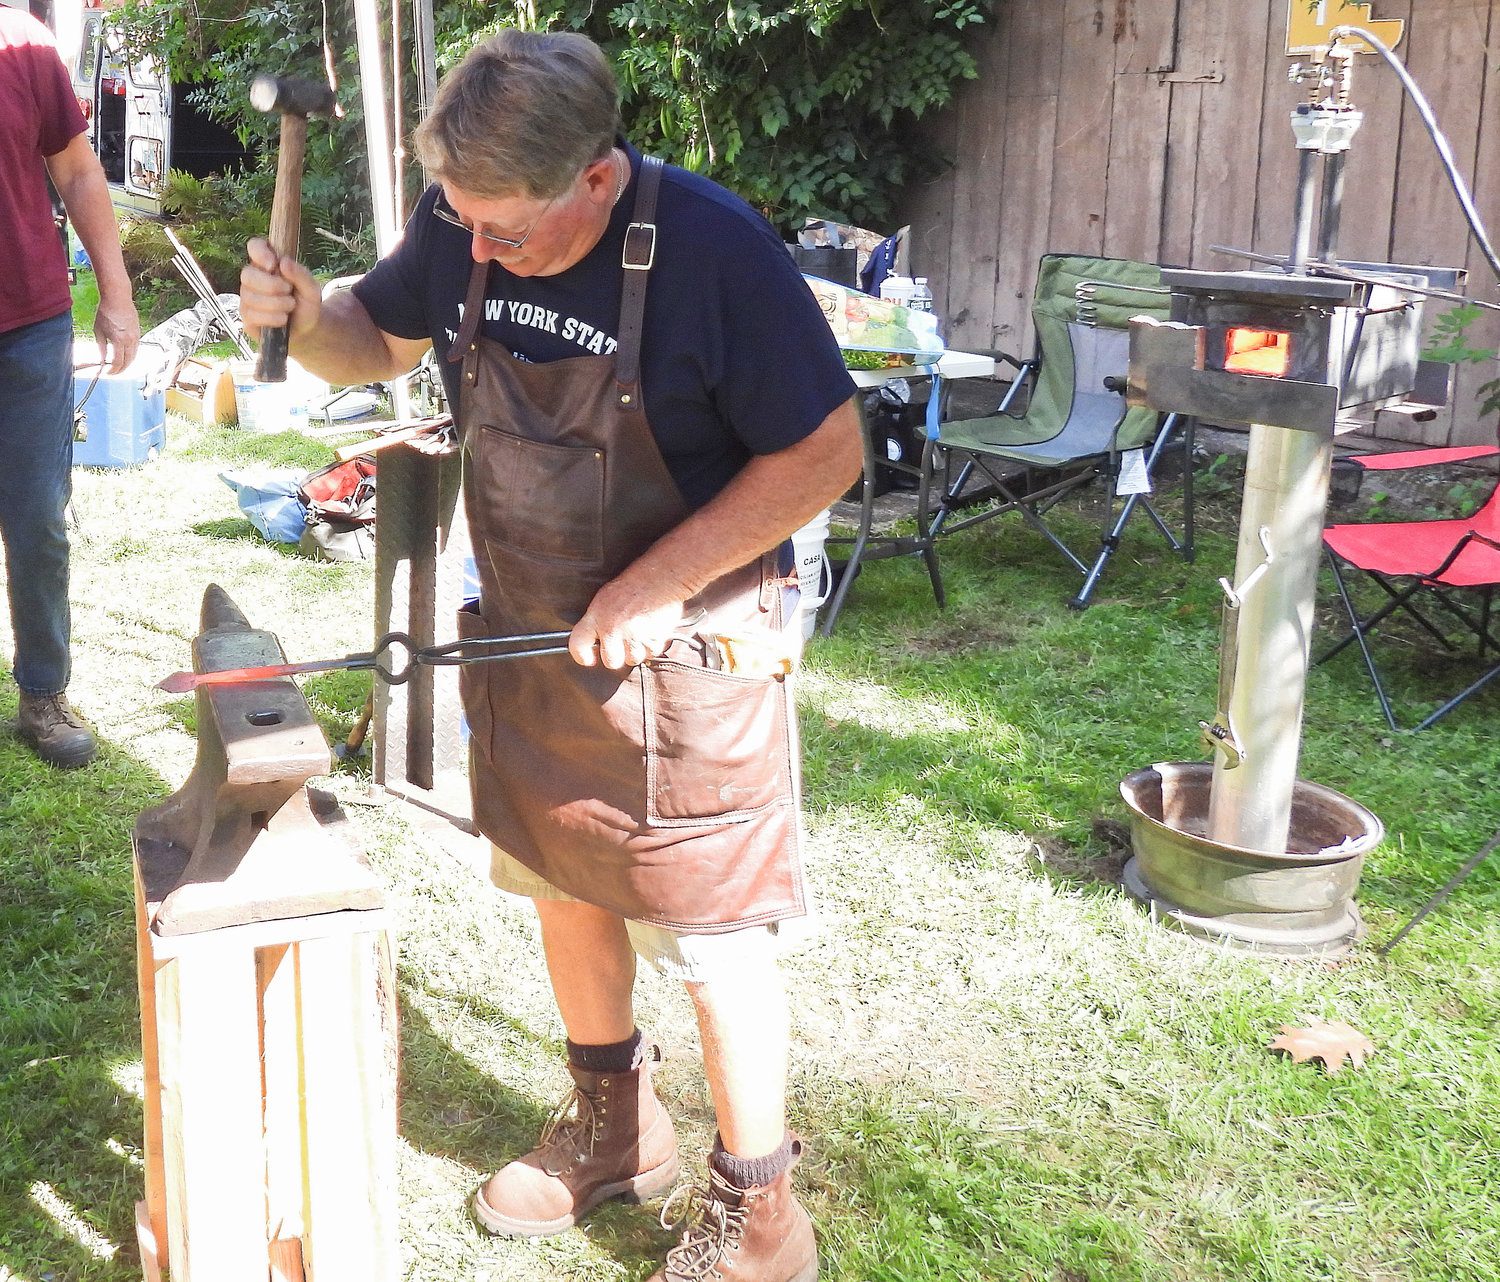 The 58th Annual Madison County Craft Festival saw artisans of every craft under the sun selling their wares at the Madison County Historical Society in Oneida on Saturday, Sept. 10. The New York State Designer Blacksmiths demonstrate how to shape and bend metal.